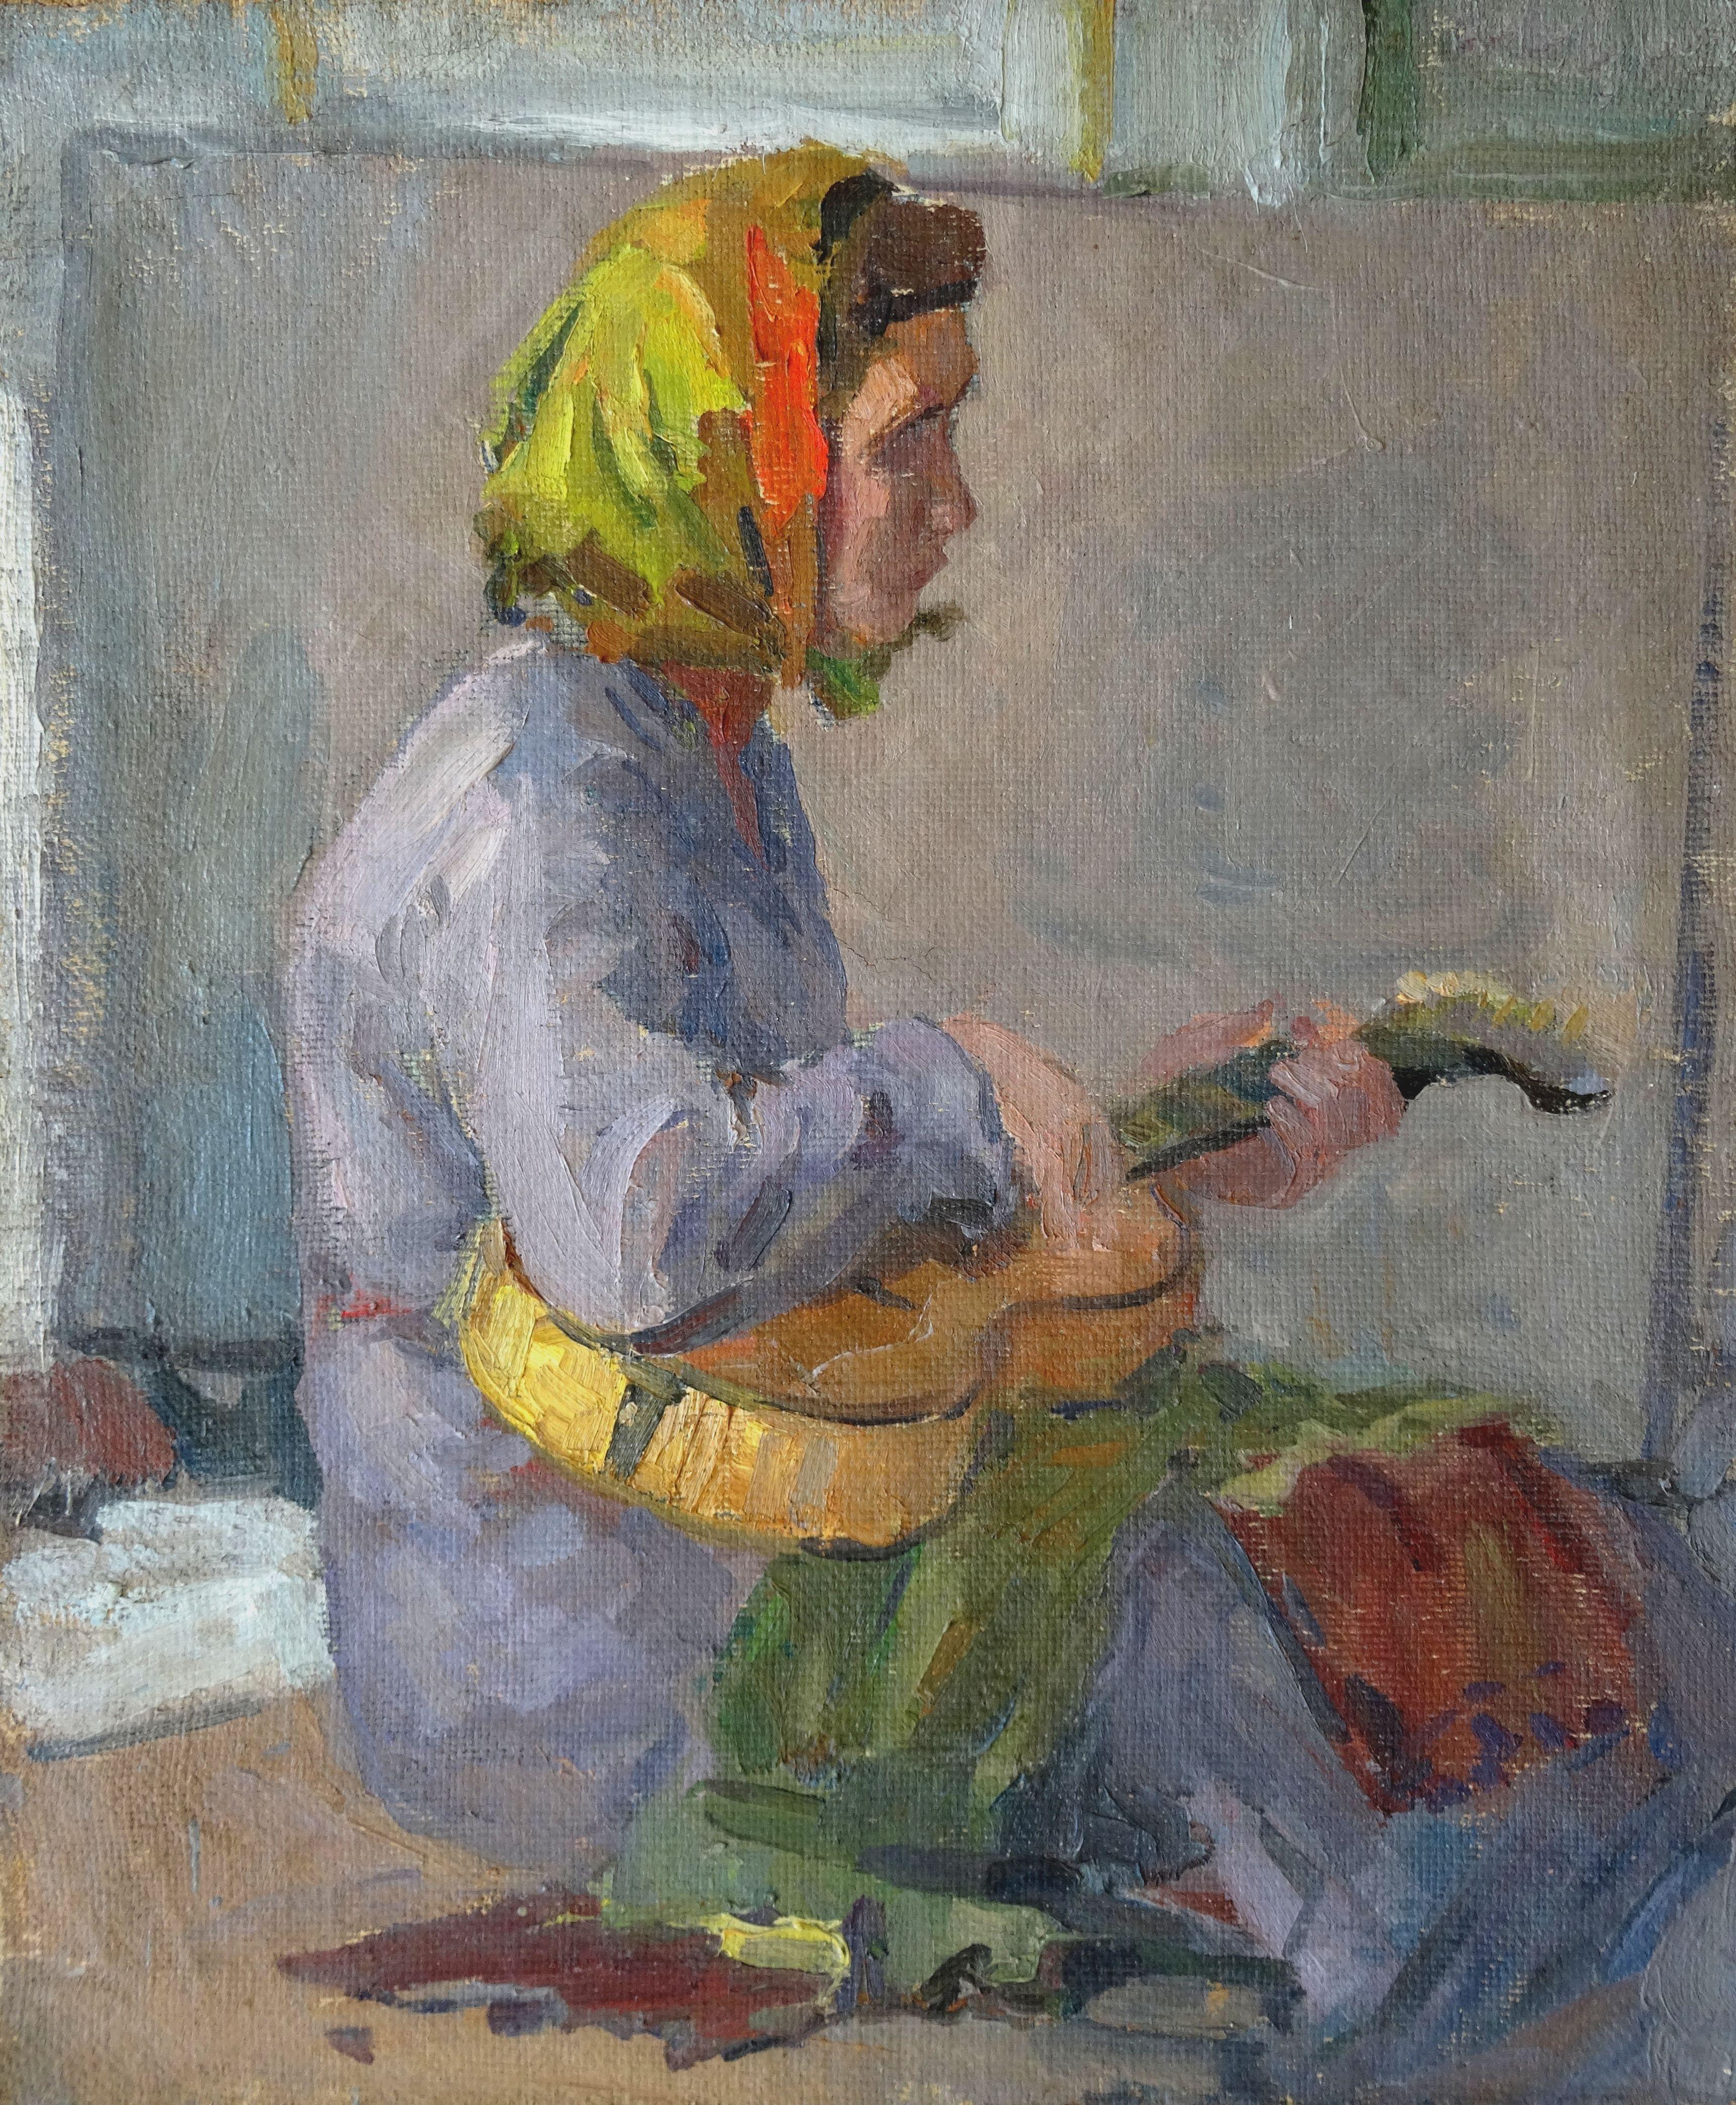 German Dontsov Figurative Painting - With a guitar. Oil on canvas, 78.5x65 cm